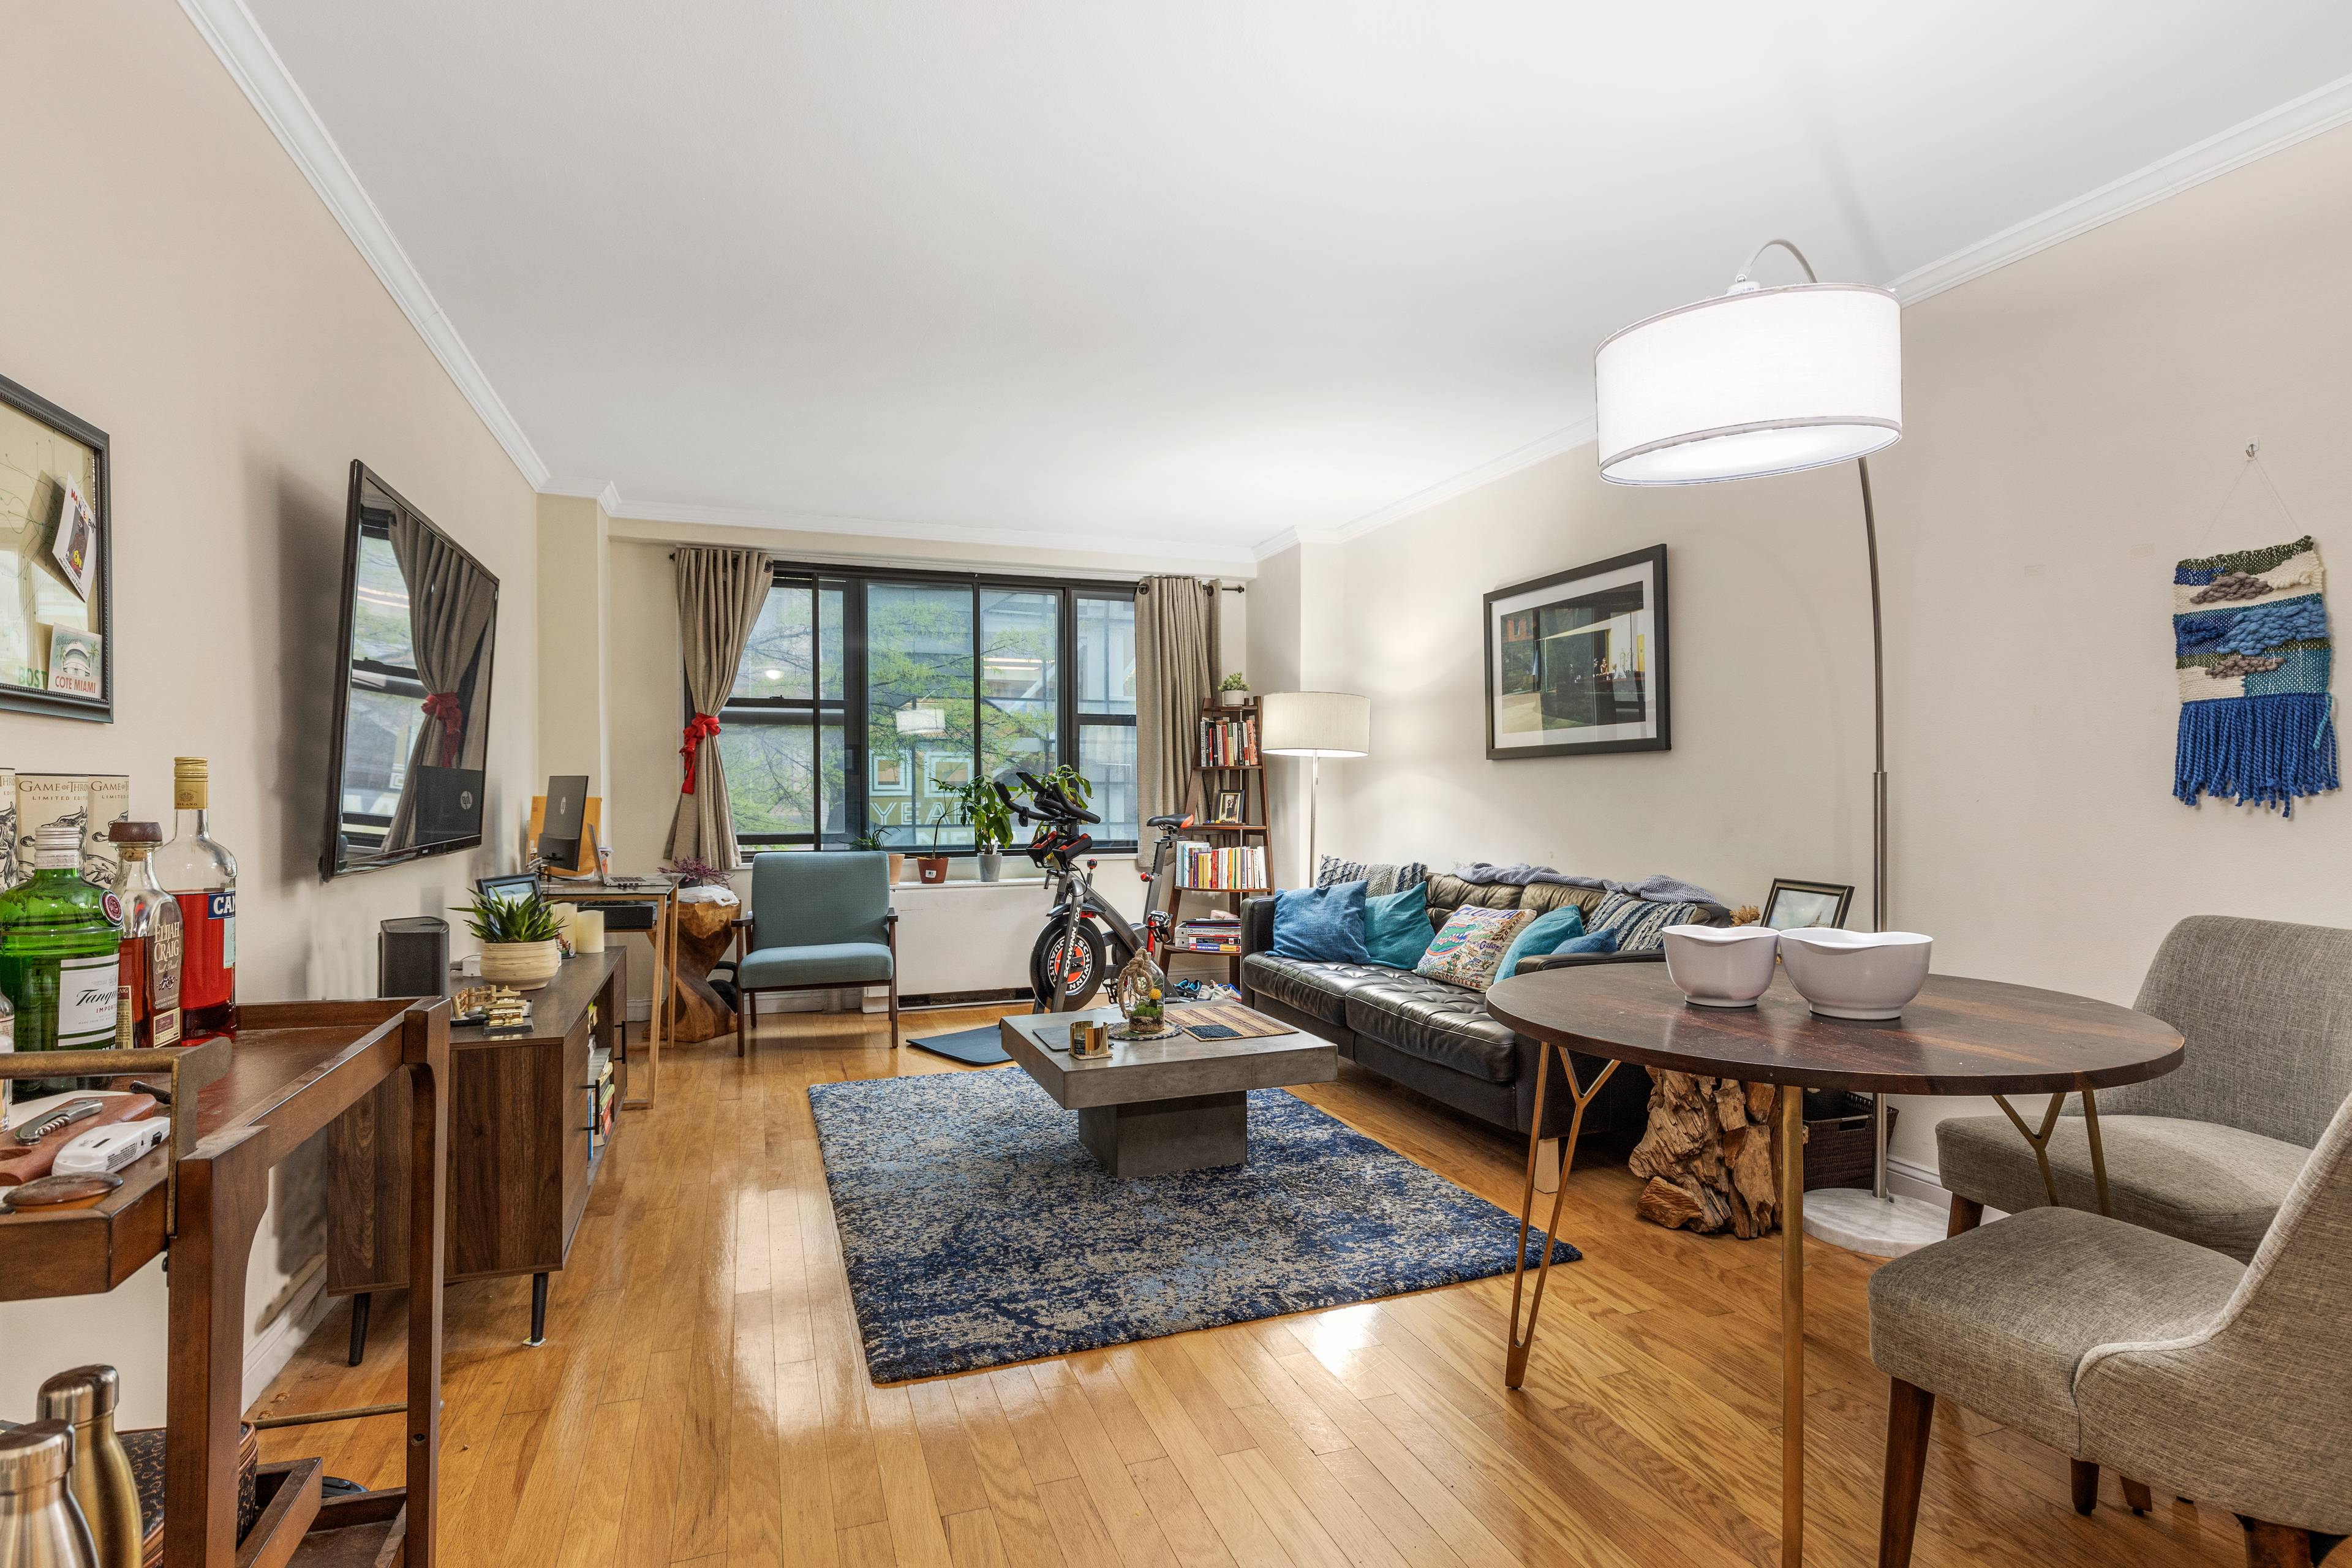 This is your opportunity to live in this stunning one bedroom at Union Square.